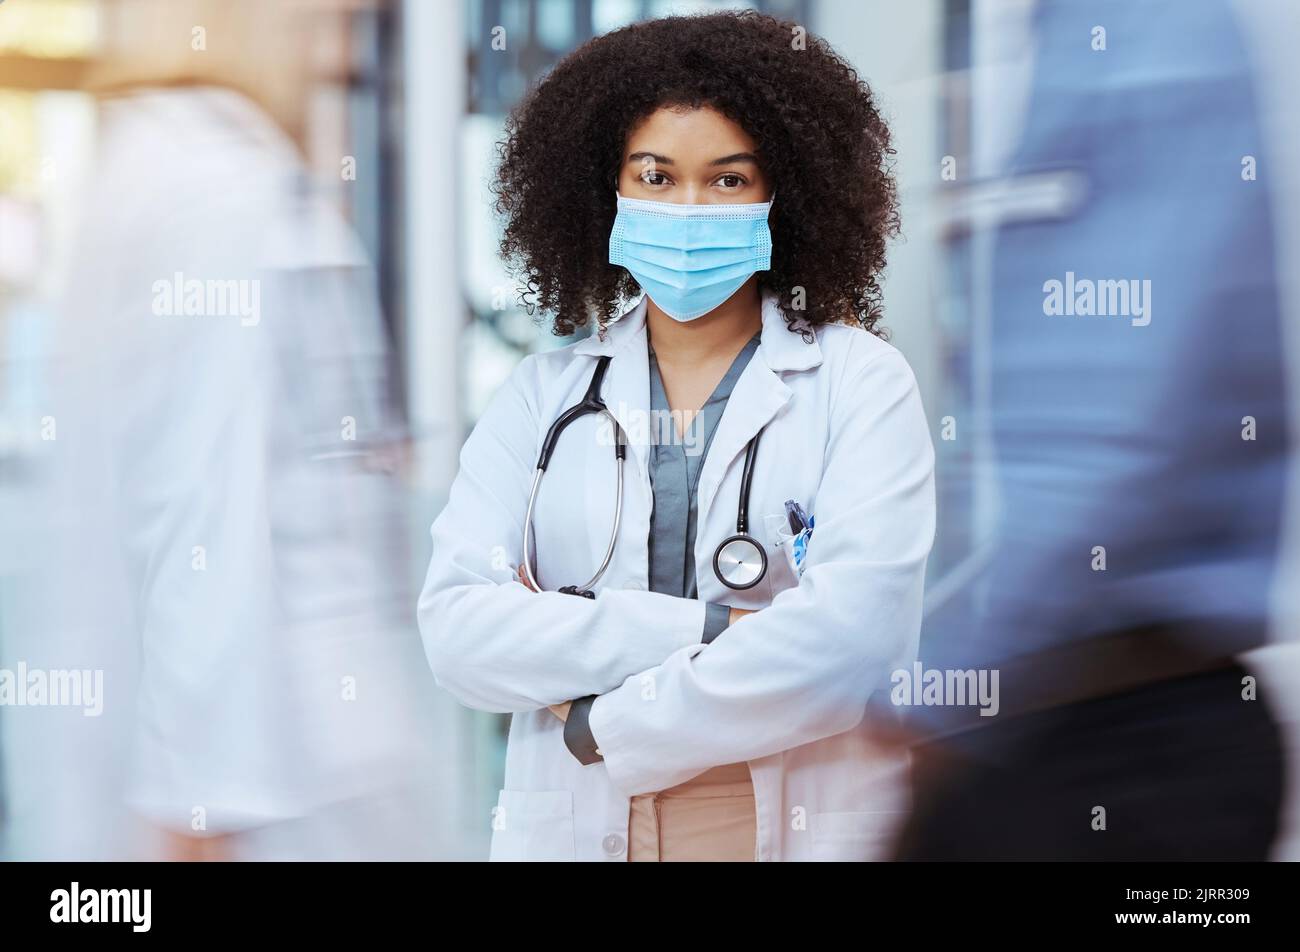 Medical doctor, woman nurse in covid and healthcare professional. Worried face expression, female professional with mask on during pandemic crisis Stock Photo